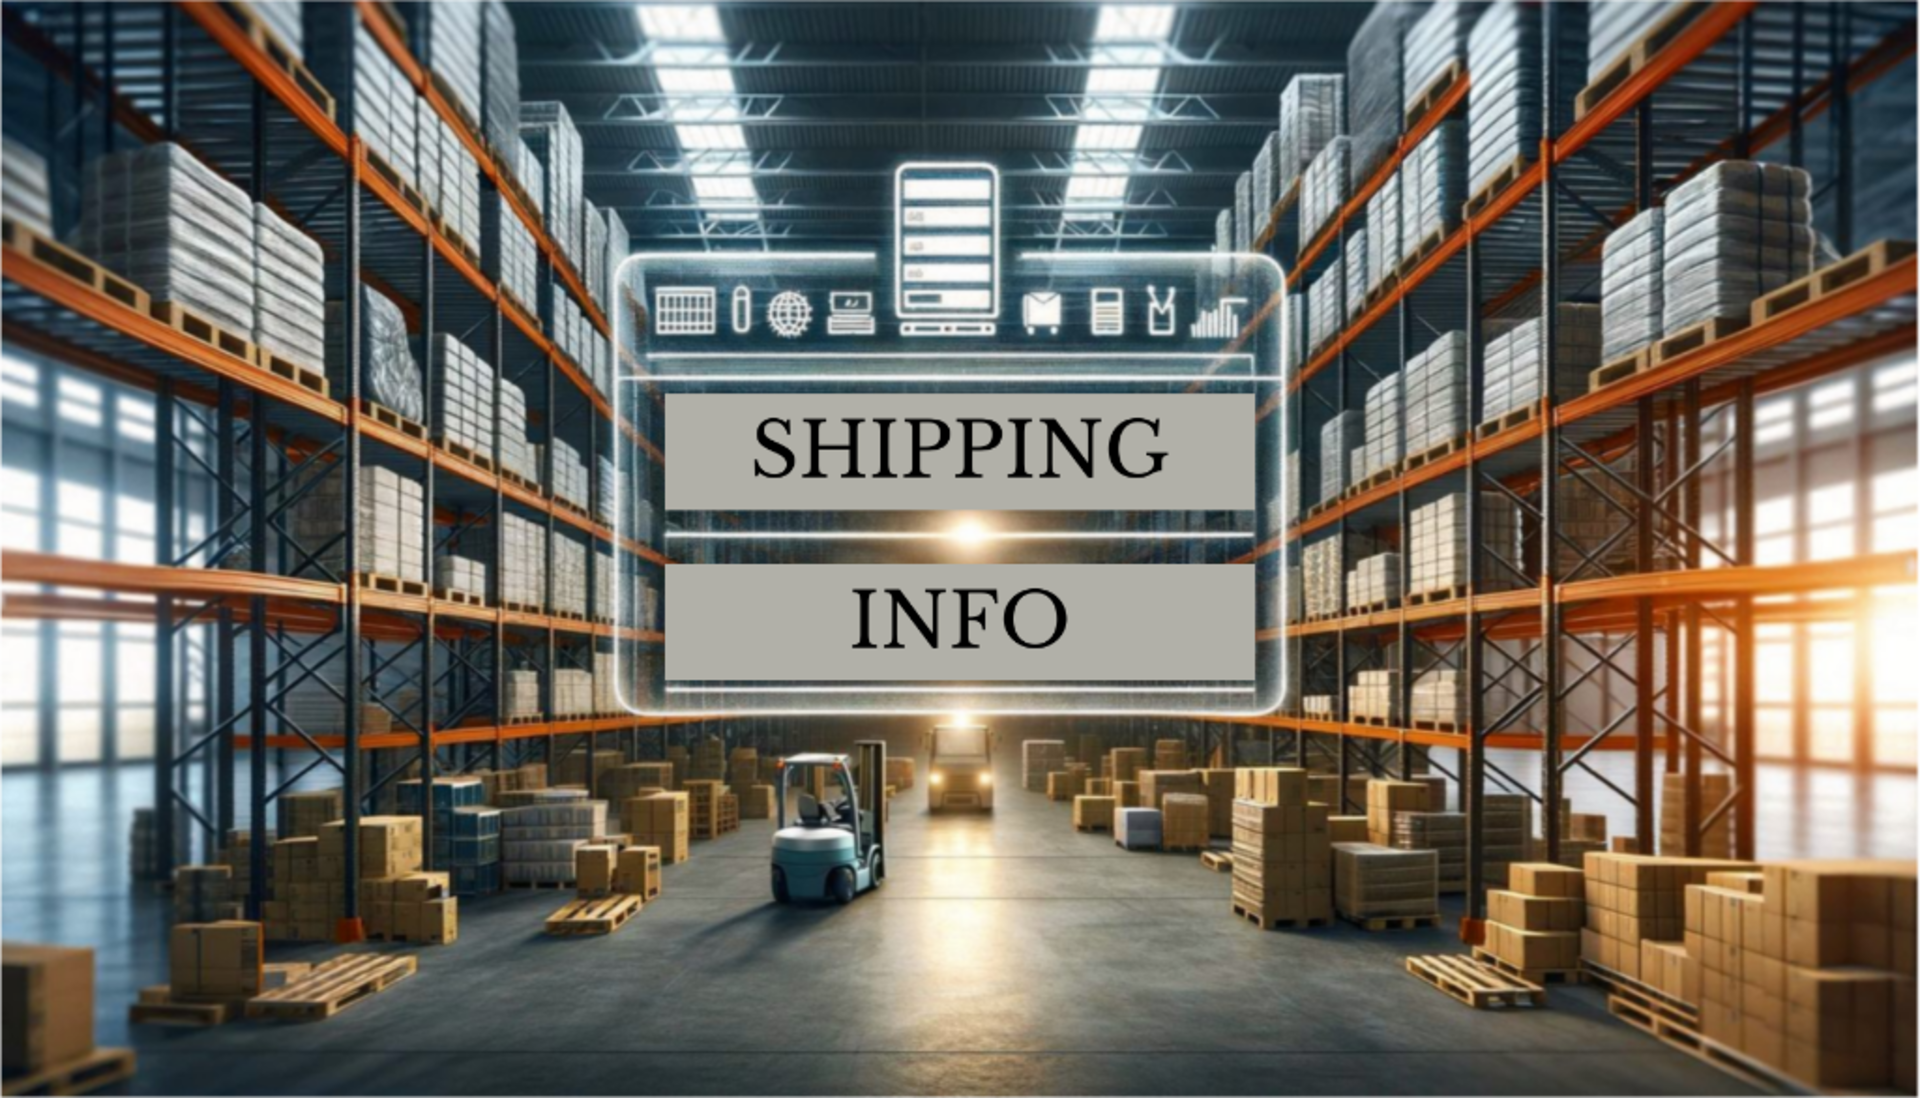 SHIPPING INFORMATION: All transportation arrangements must be made by the successful buyers after th